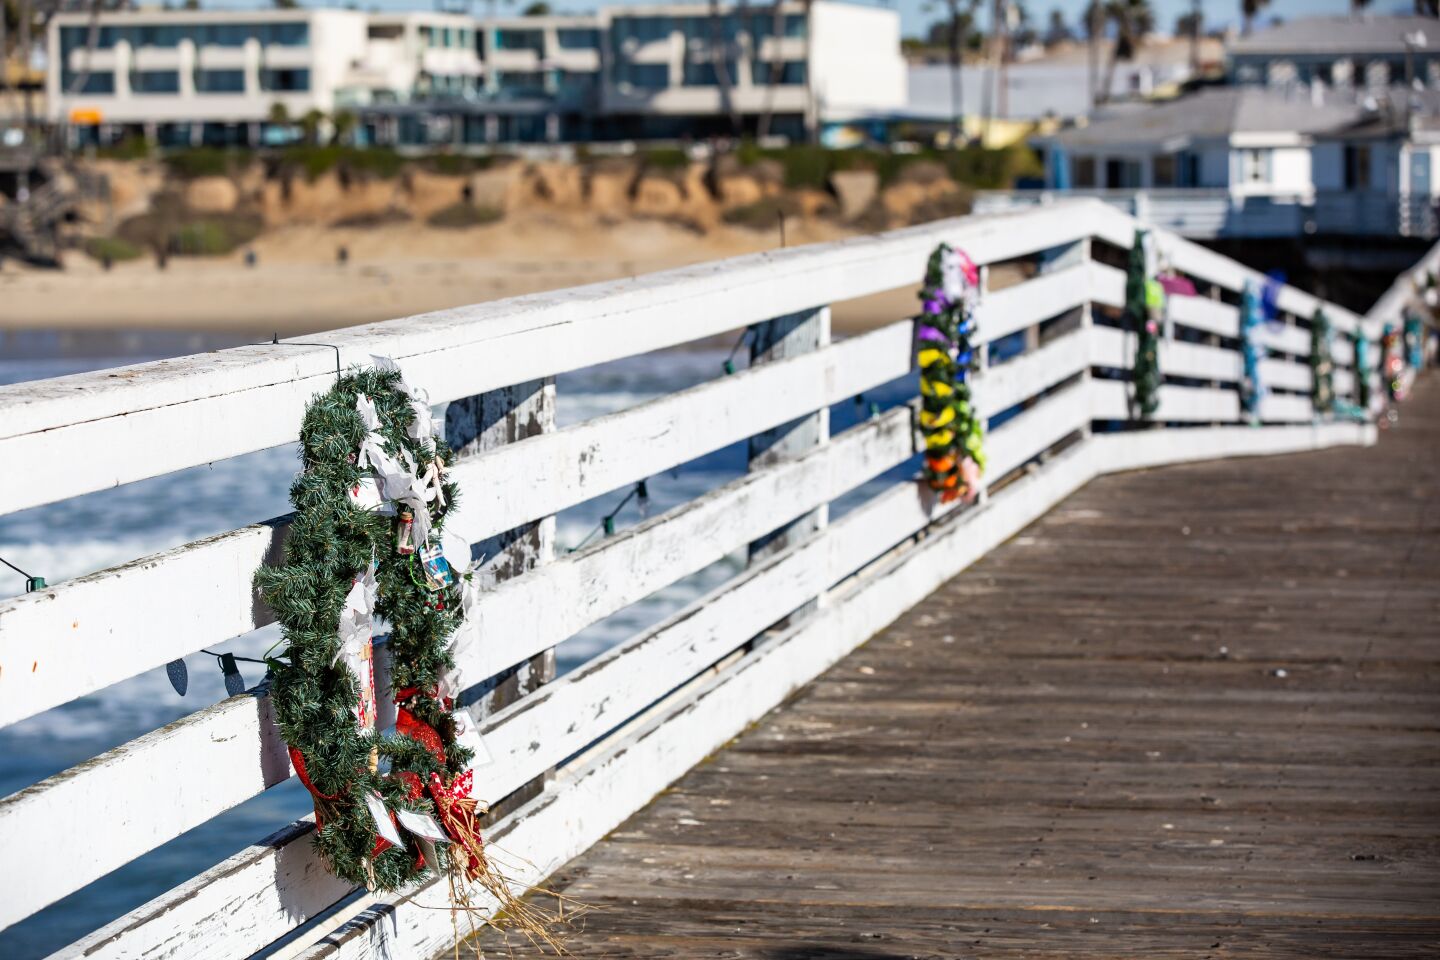 Christmas on Crystal Pier in Pacific Beach featured Christmas lights, wreaths and a large tree at the end of the pier.